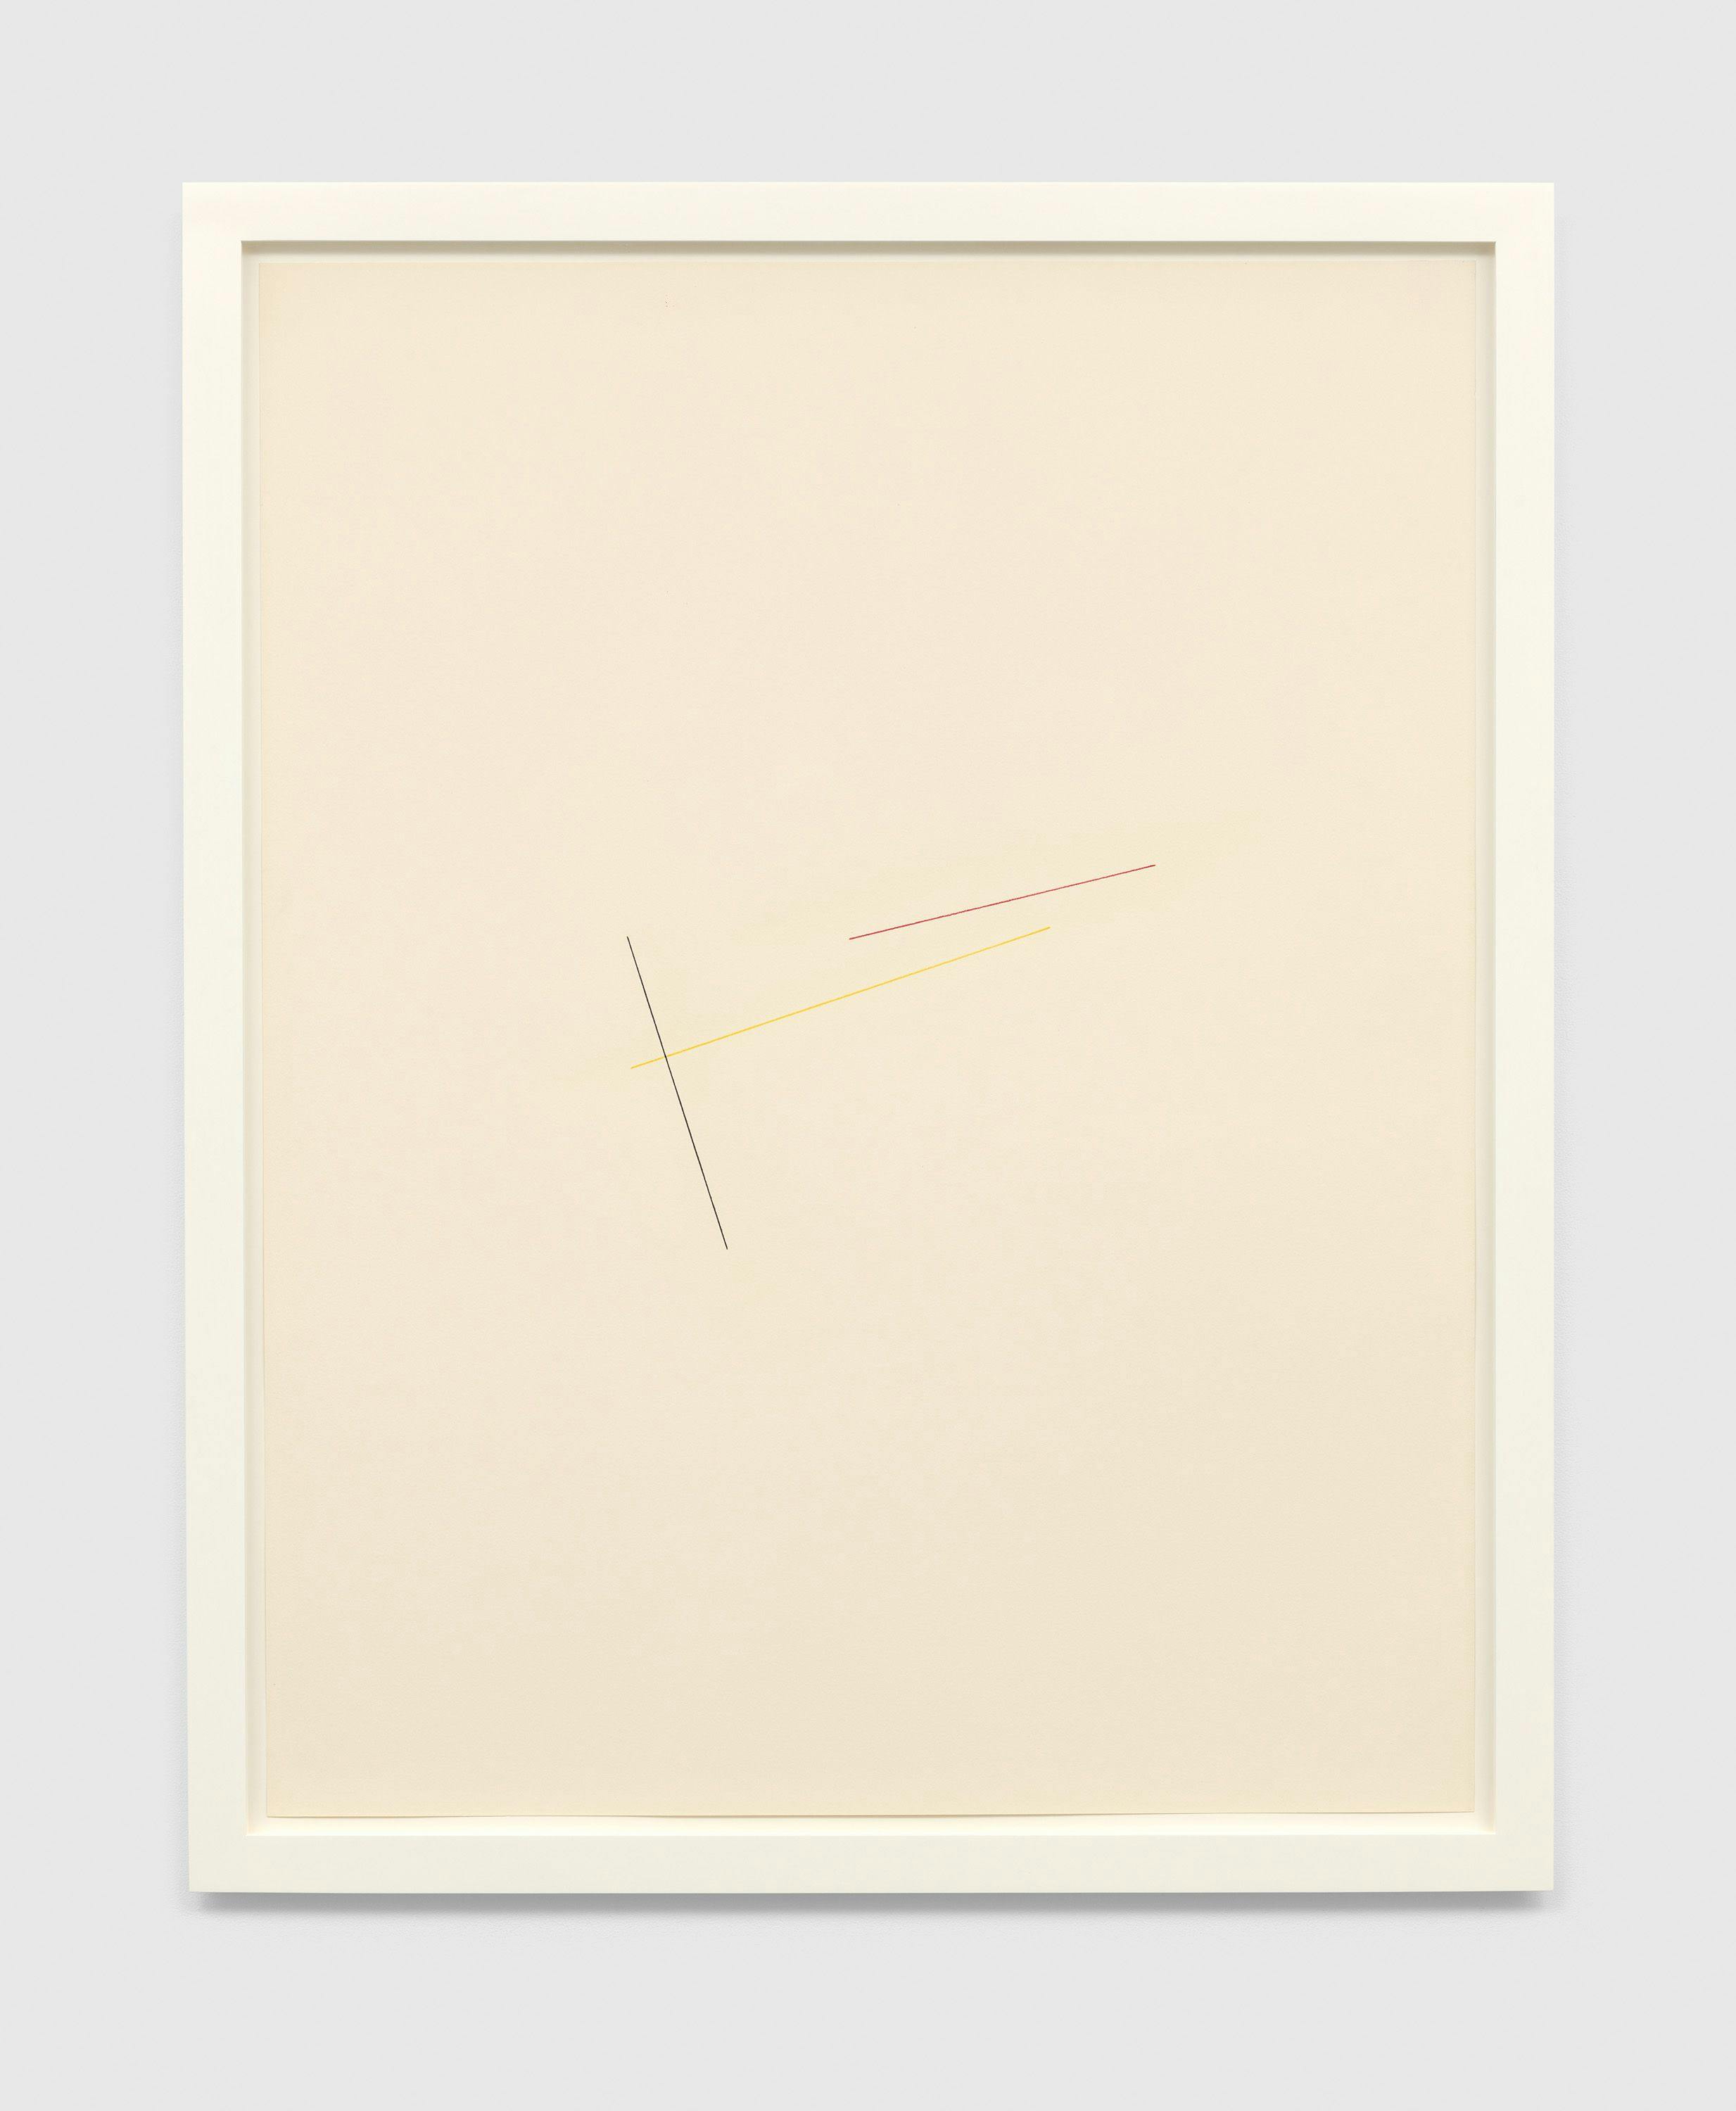 A colored pencil on paper artwork by Fred Sandback, called Untitled, dated 1986.